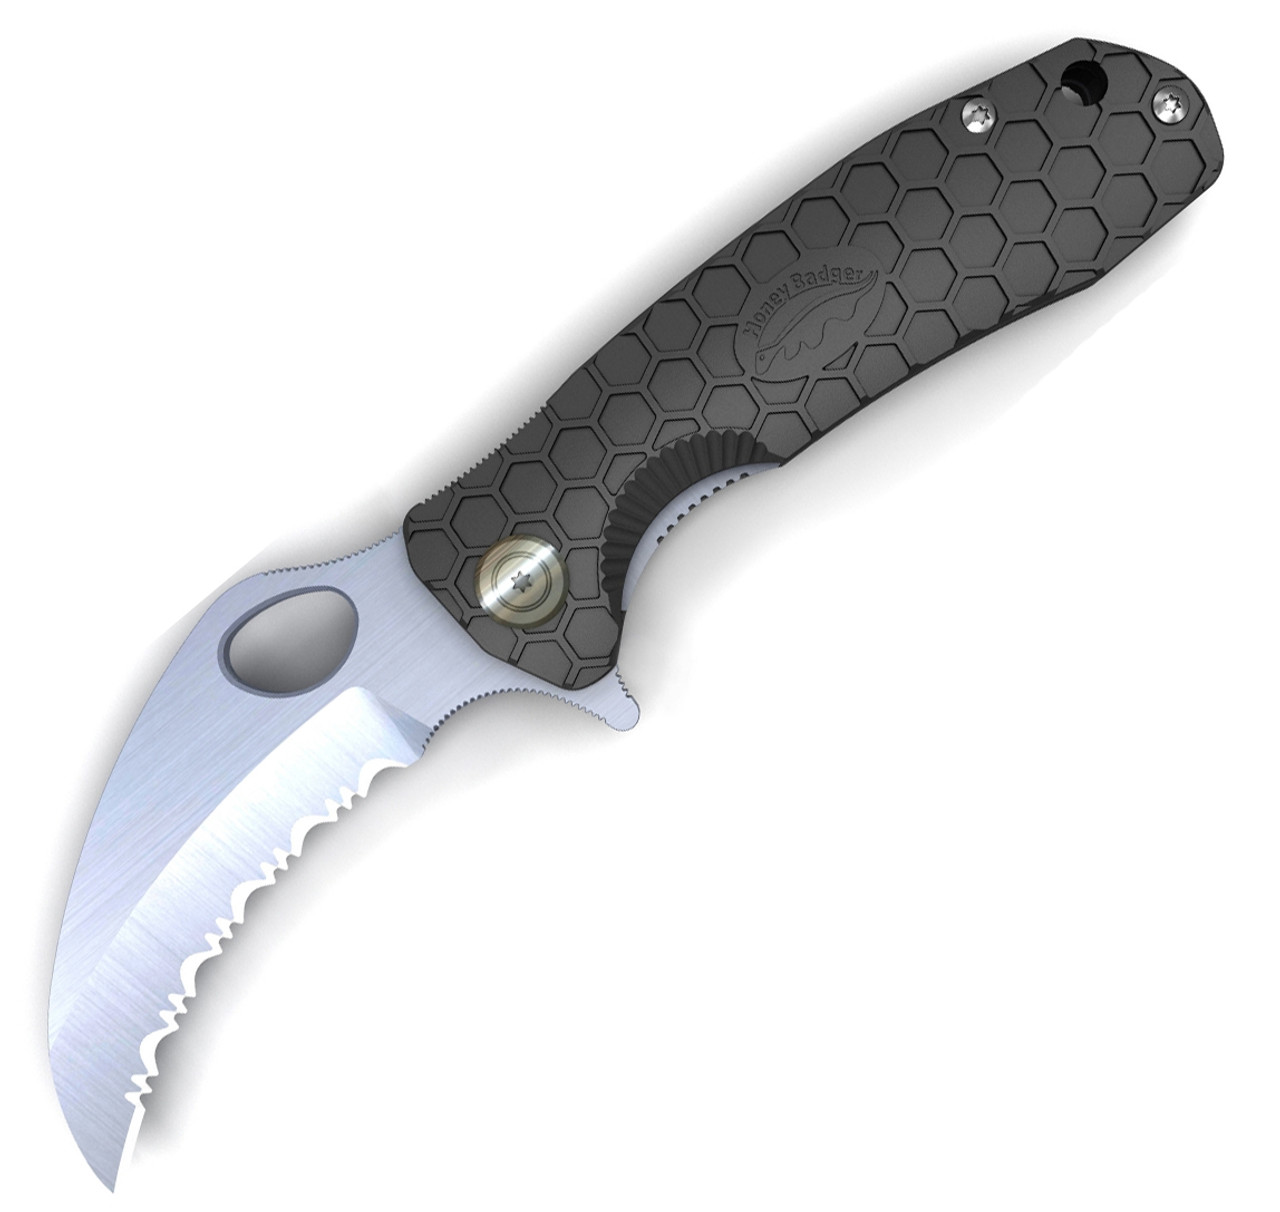 Honey Badger Knives Small Claw Flipper HB1151, 2.75" 8Cr13Mov Claw Serrated Blade, Black FRN Handle